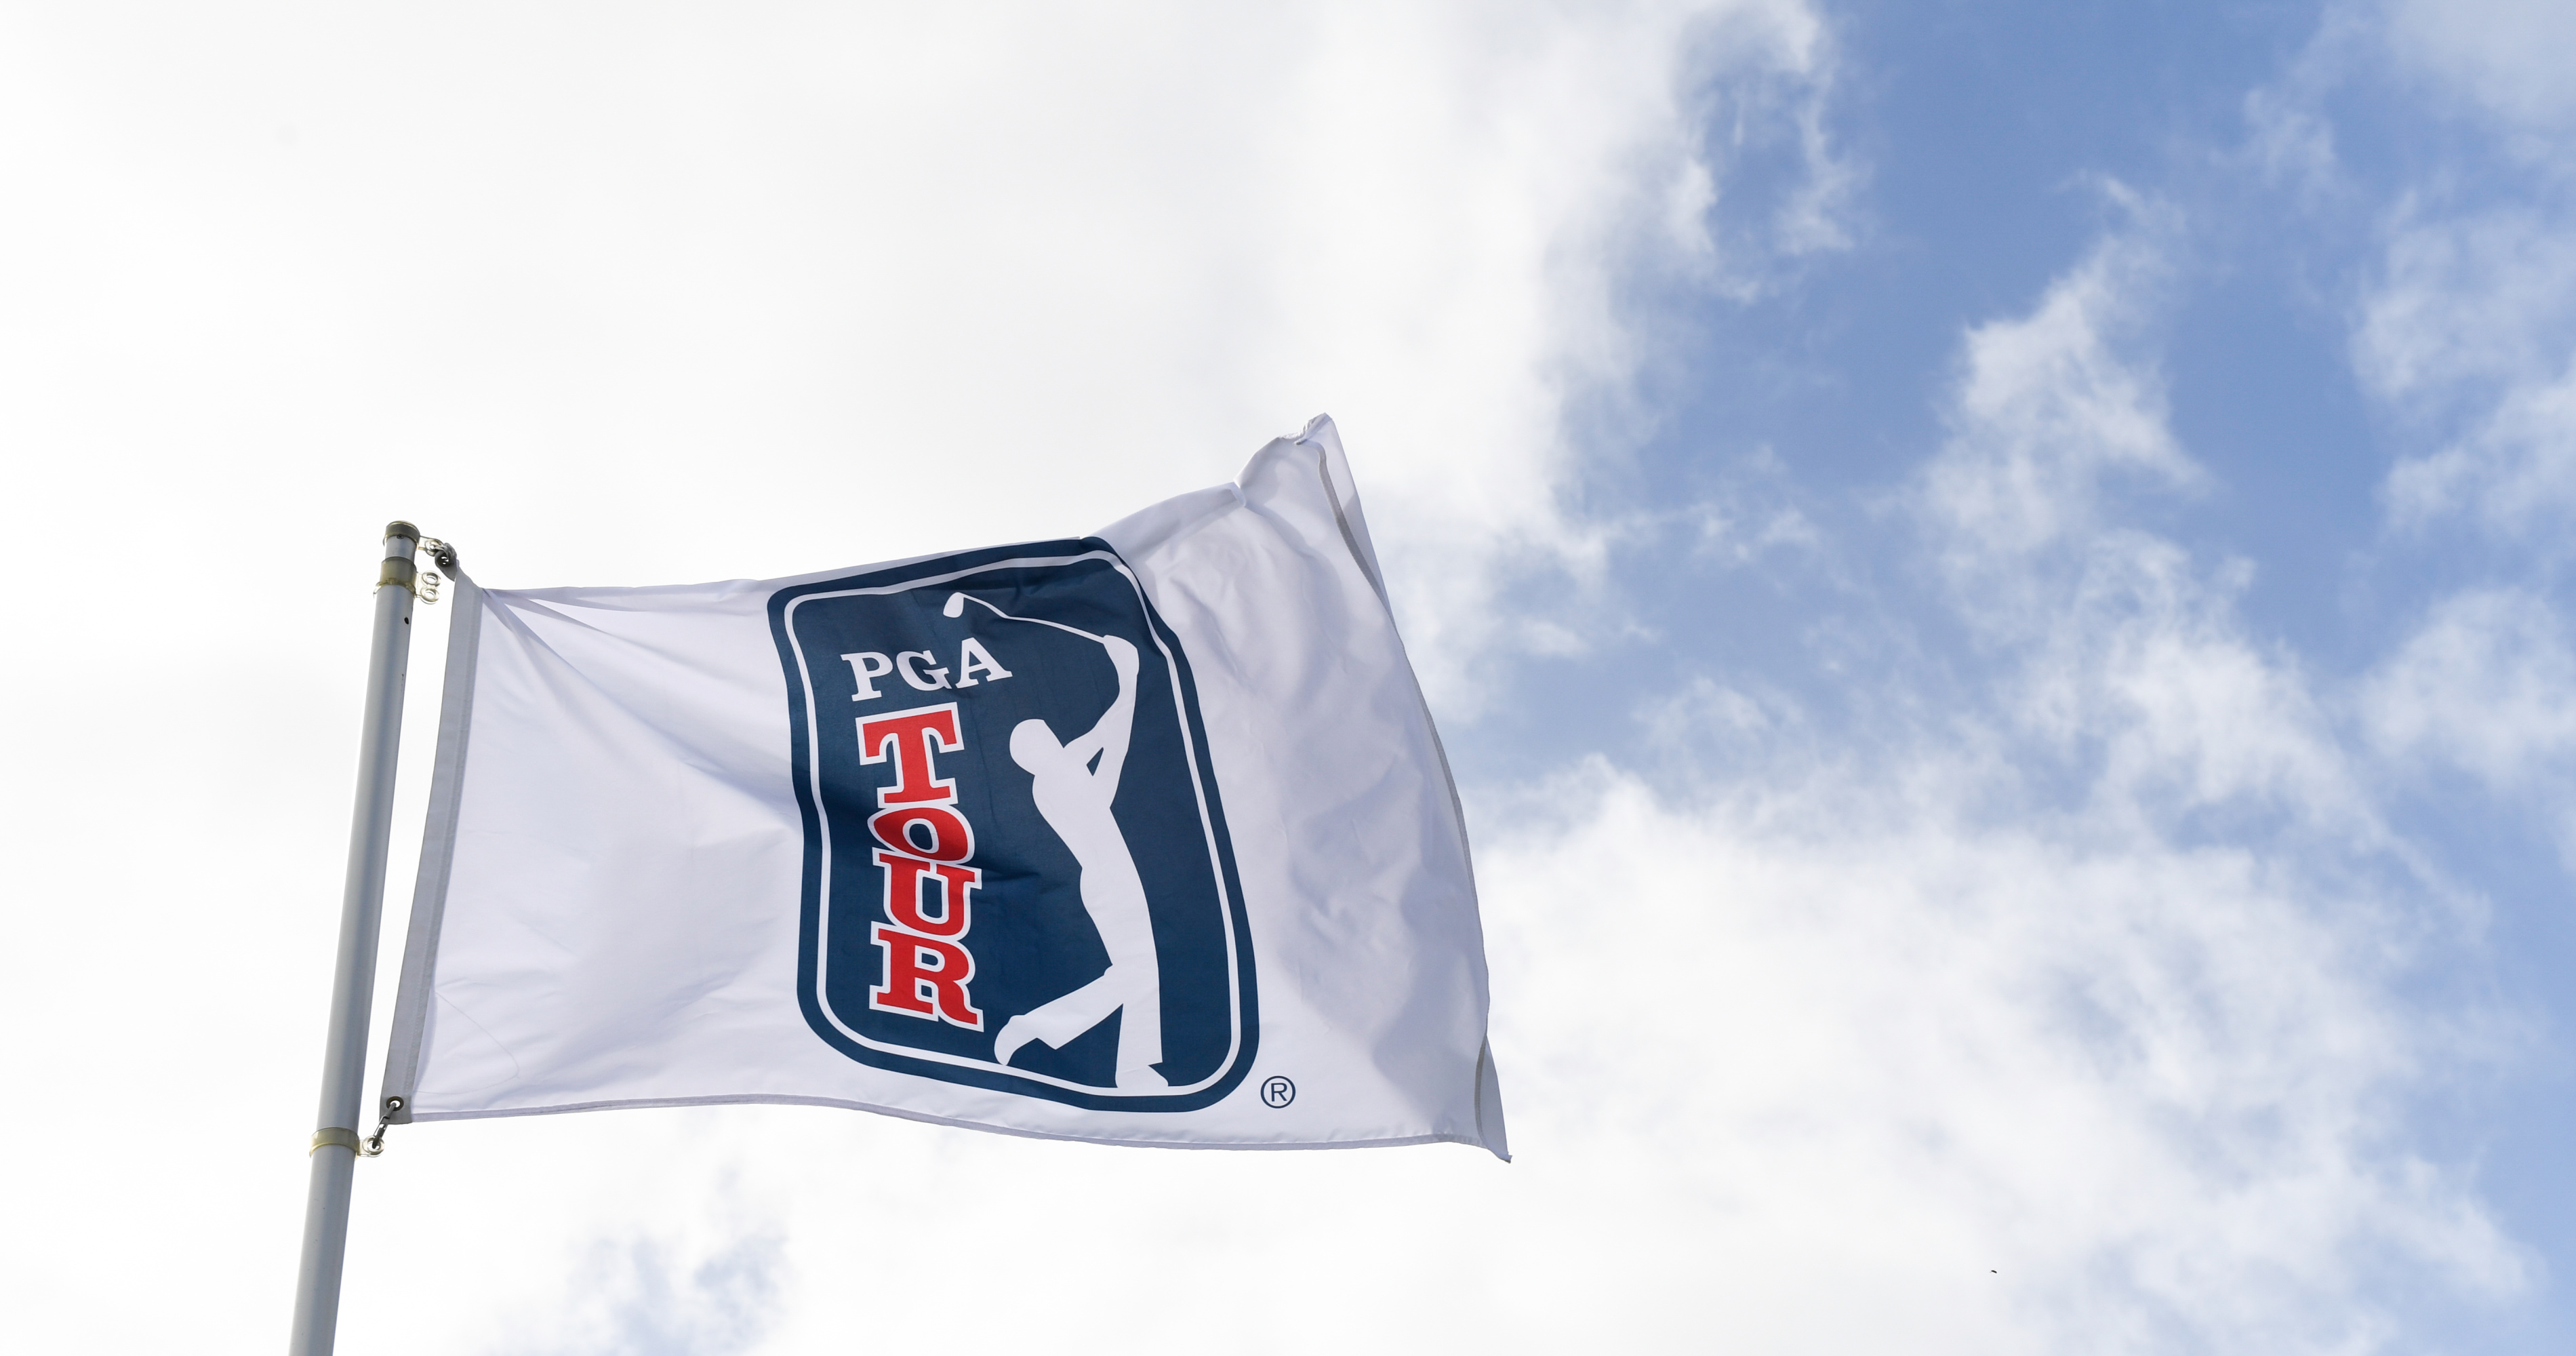 Report: Fenway Sports Group Puts in ‘Monster’ Financial Offer to PGA Tour